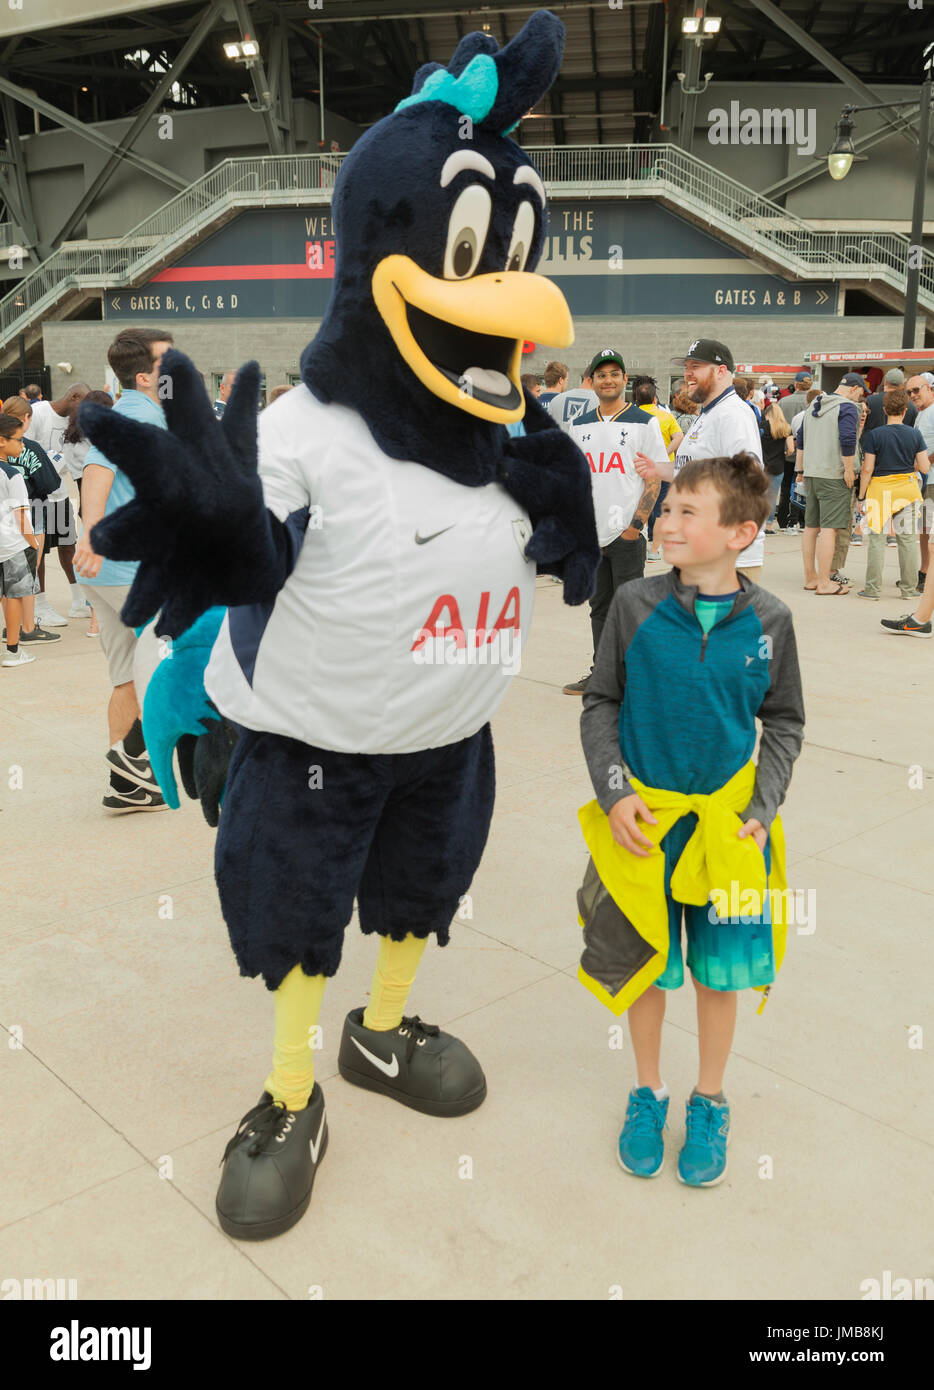 Harrison, NJ USA - July 25, 2017: Tottenham Hotspur mascot Chirpy Cockerel greets fans before International Champions Cup game between Tottenham Hotspur and AS Roma on Red Bulls Arena Roma won 3 - 2 Stock Photo